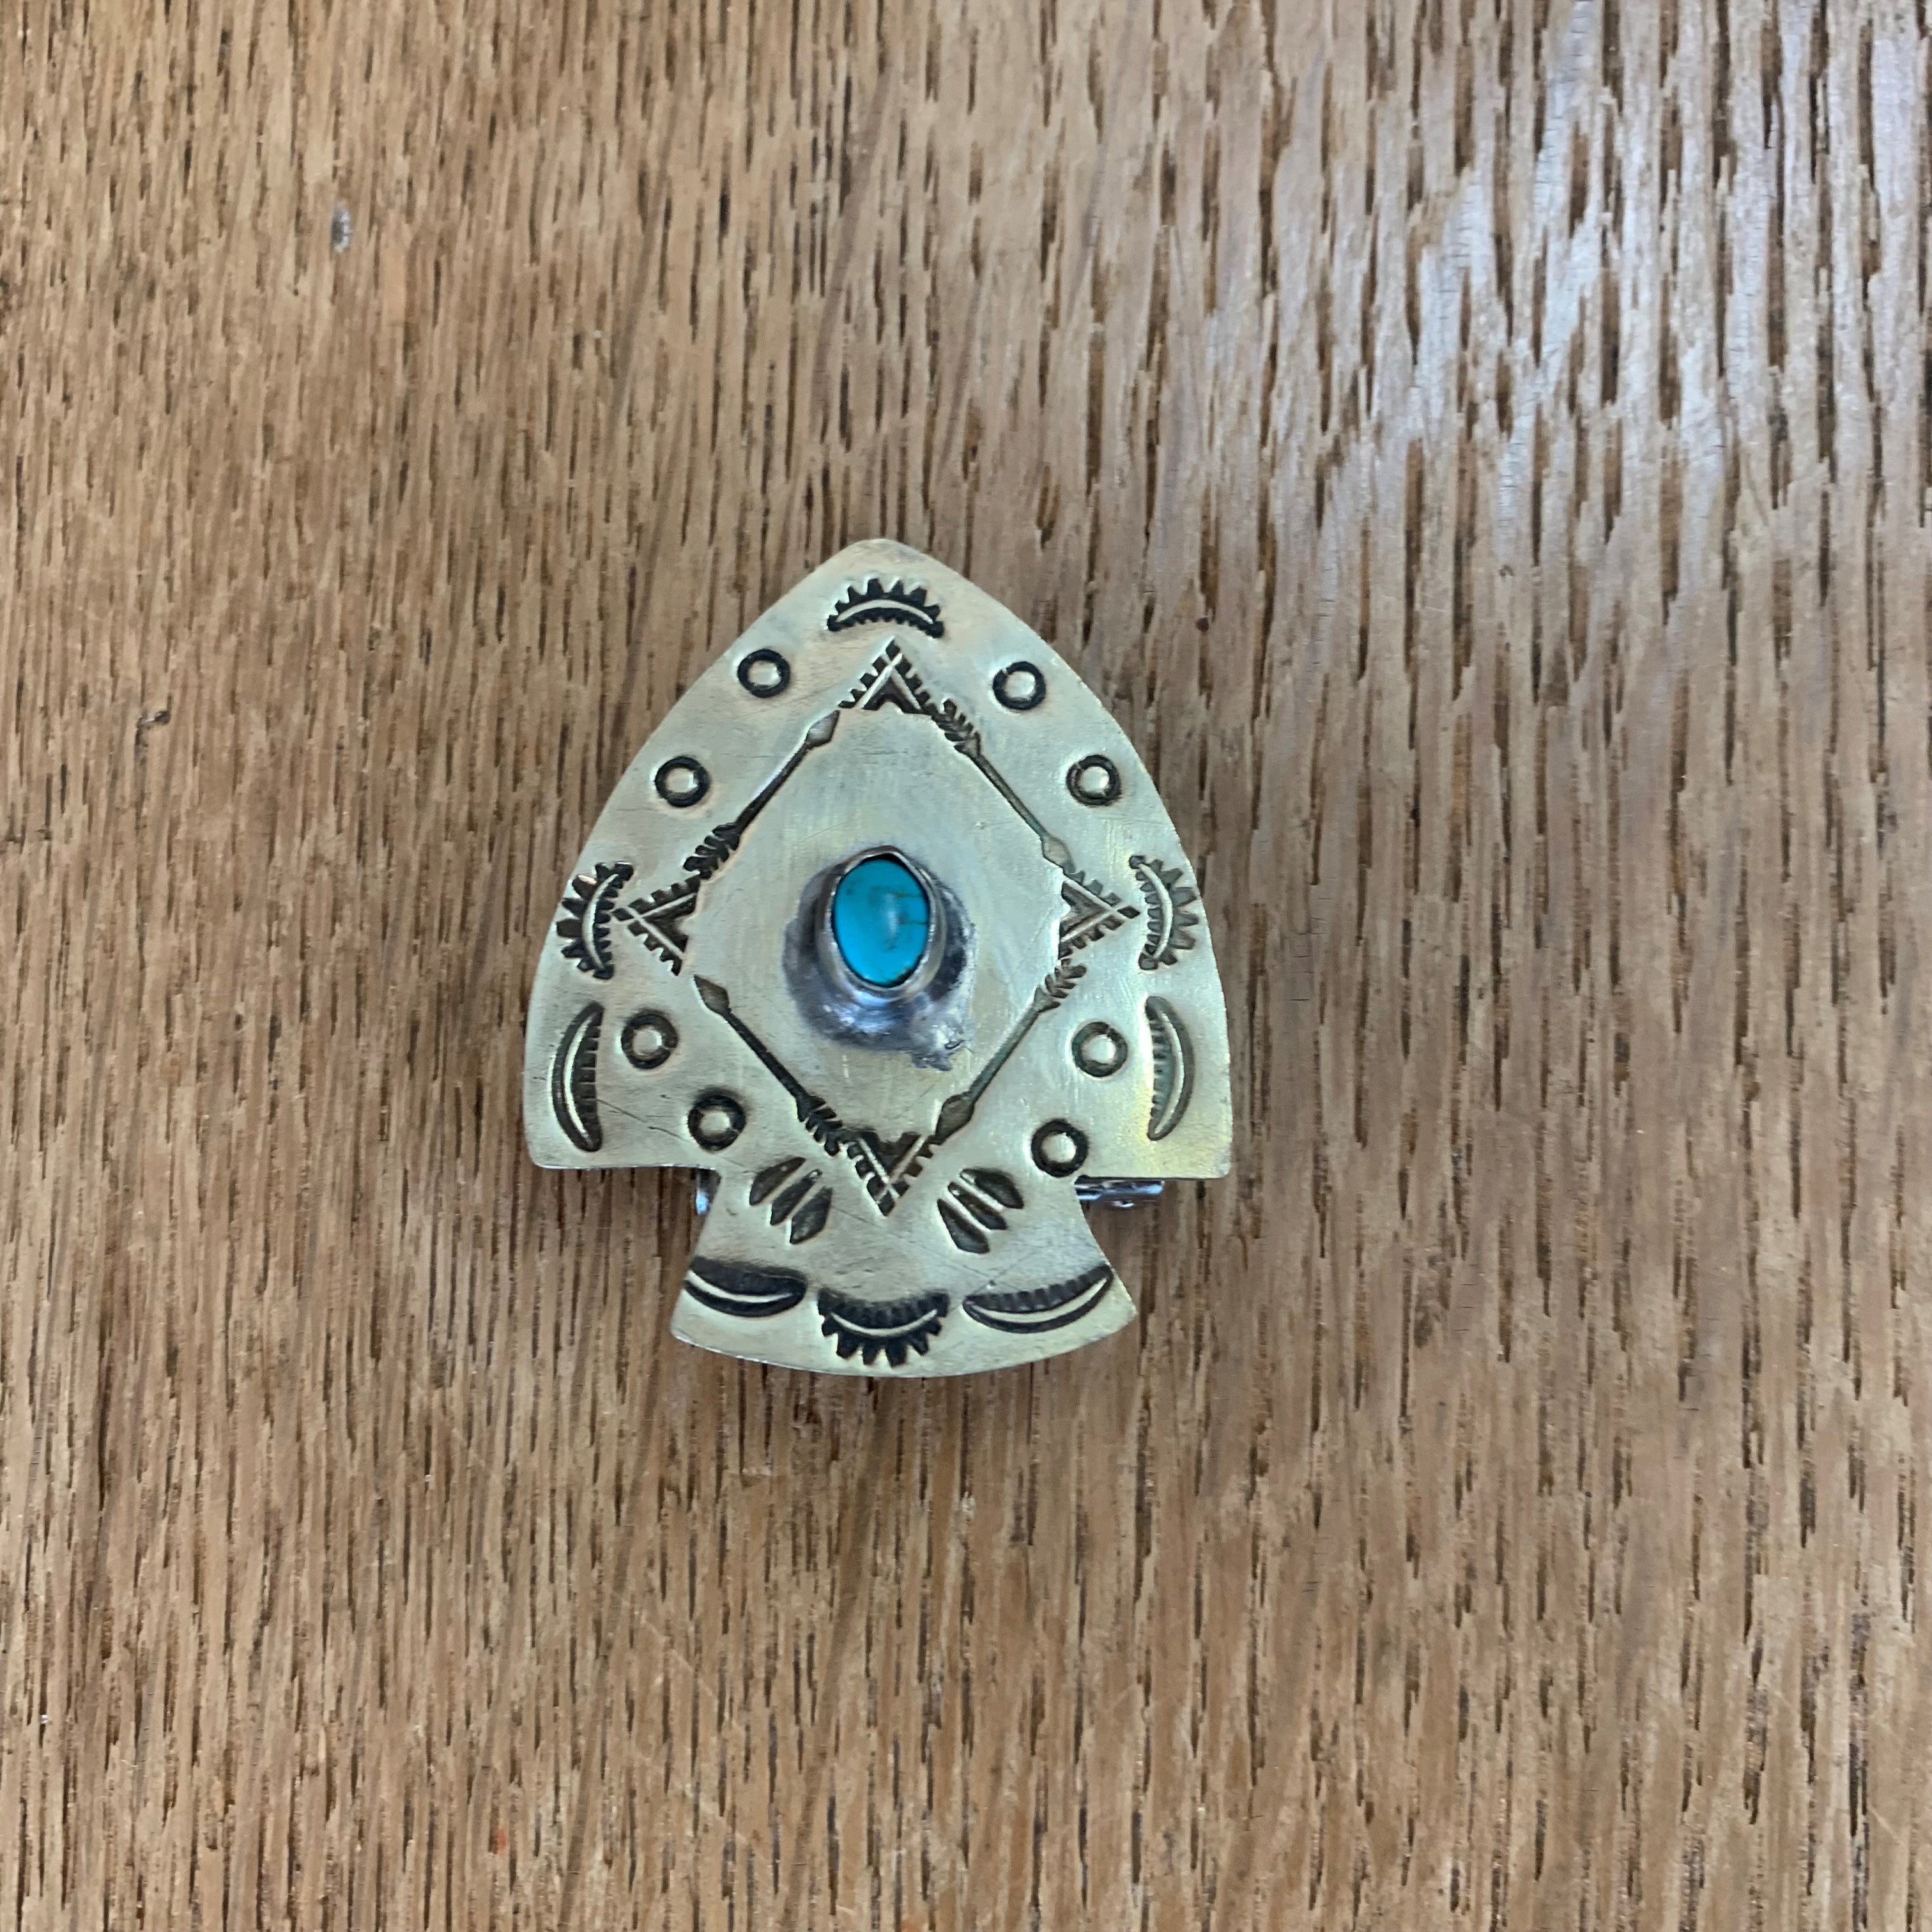 J. Alexander Arrowhead Pin with Turquoise Stone